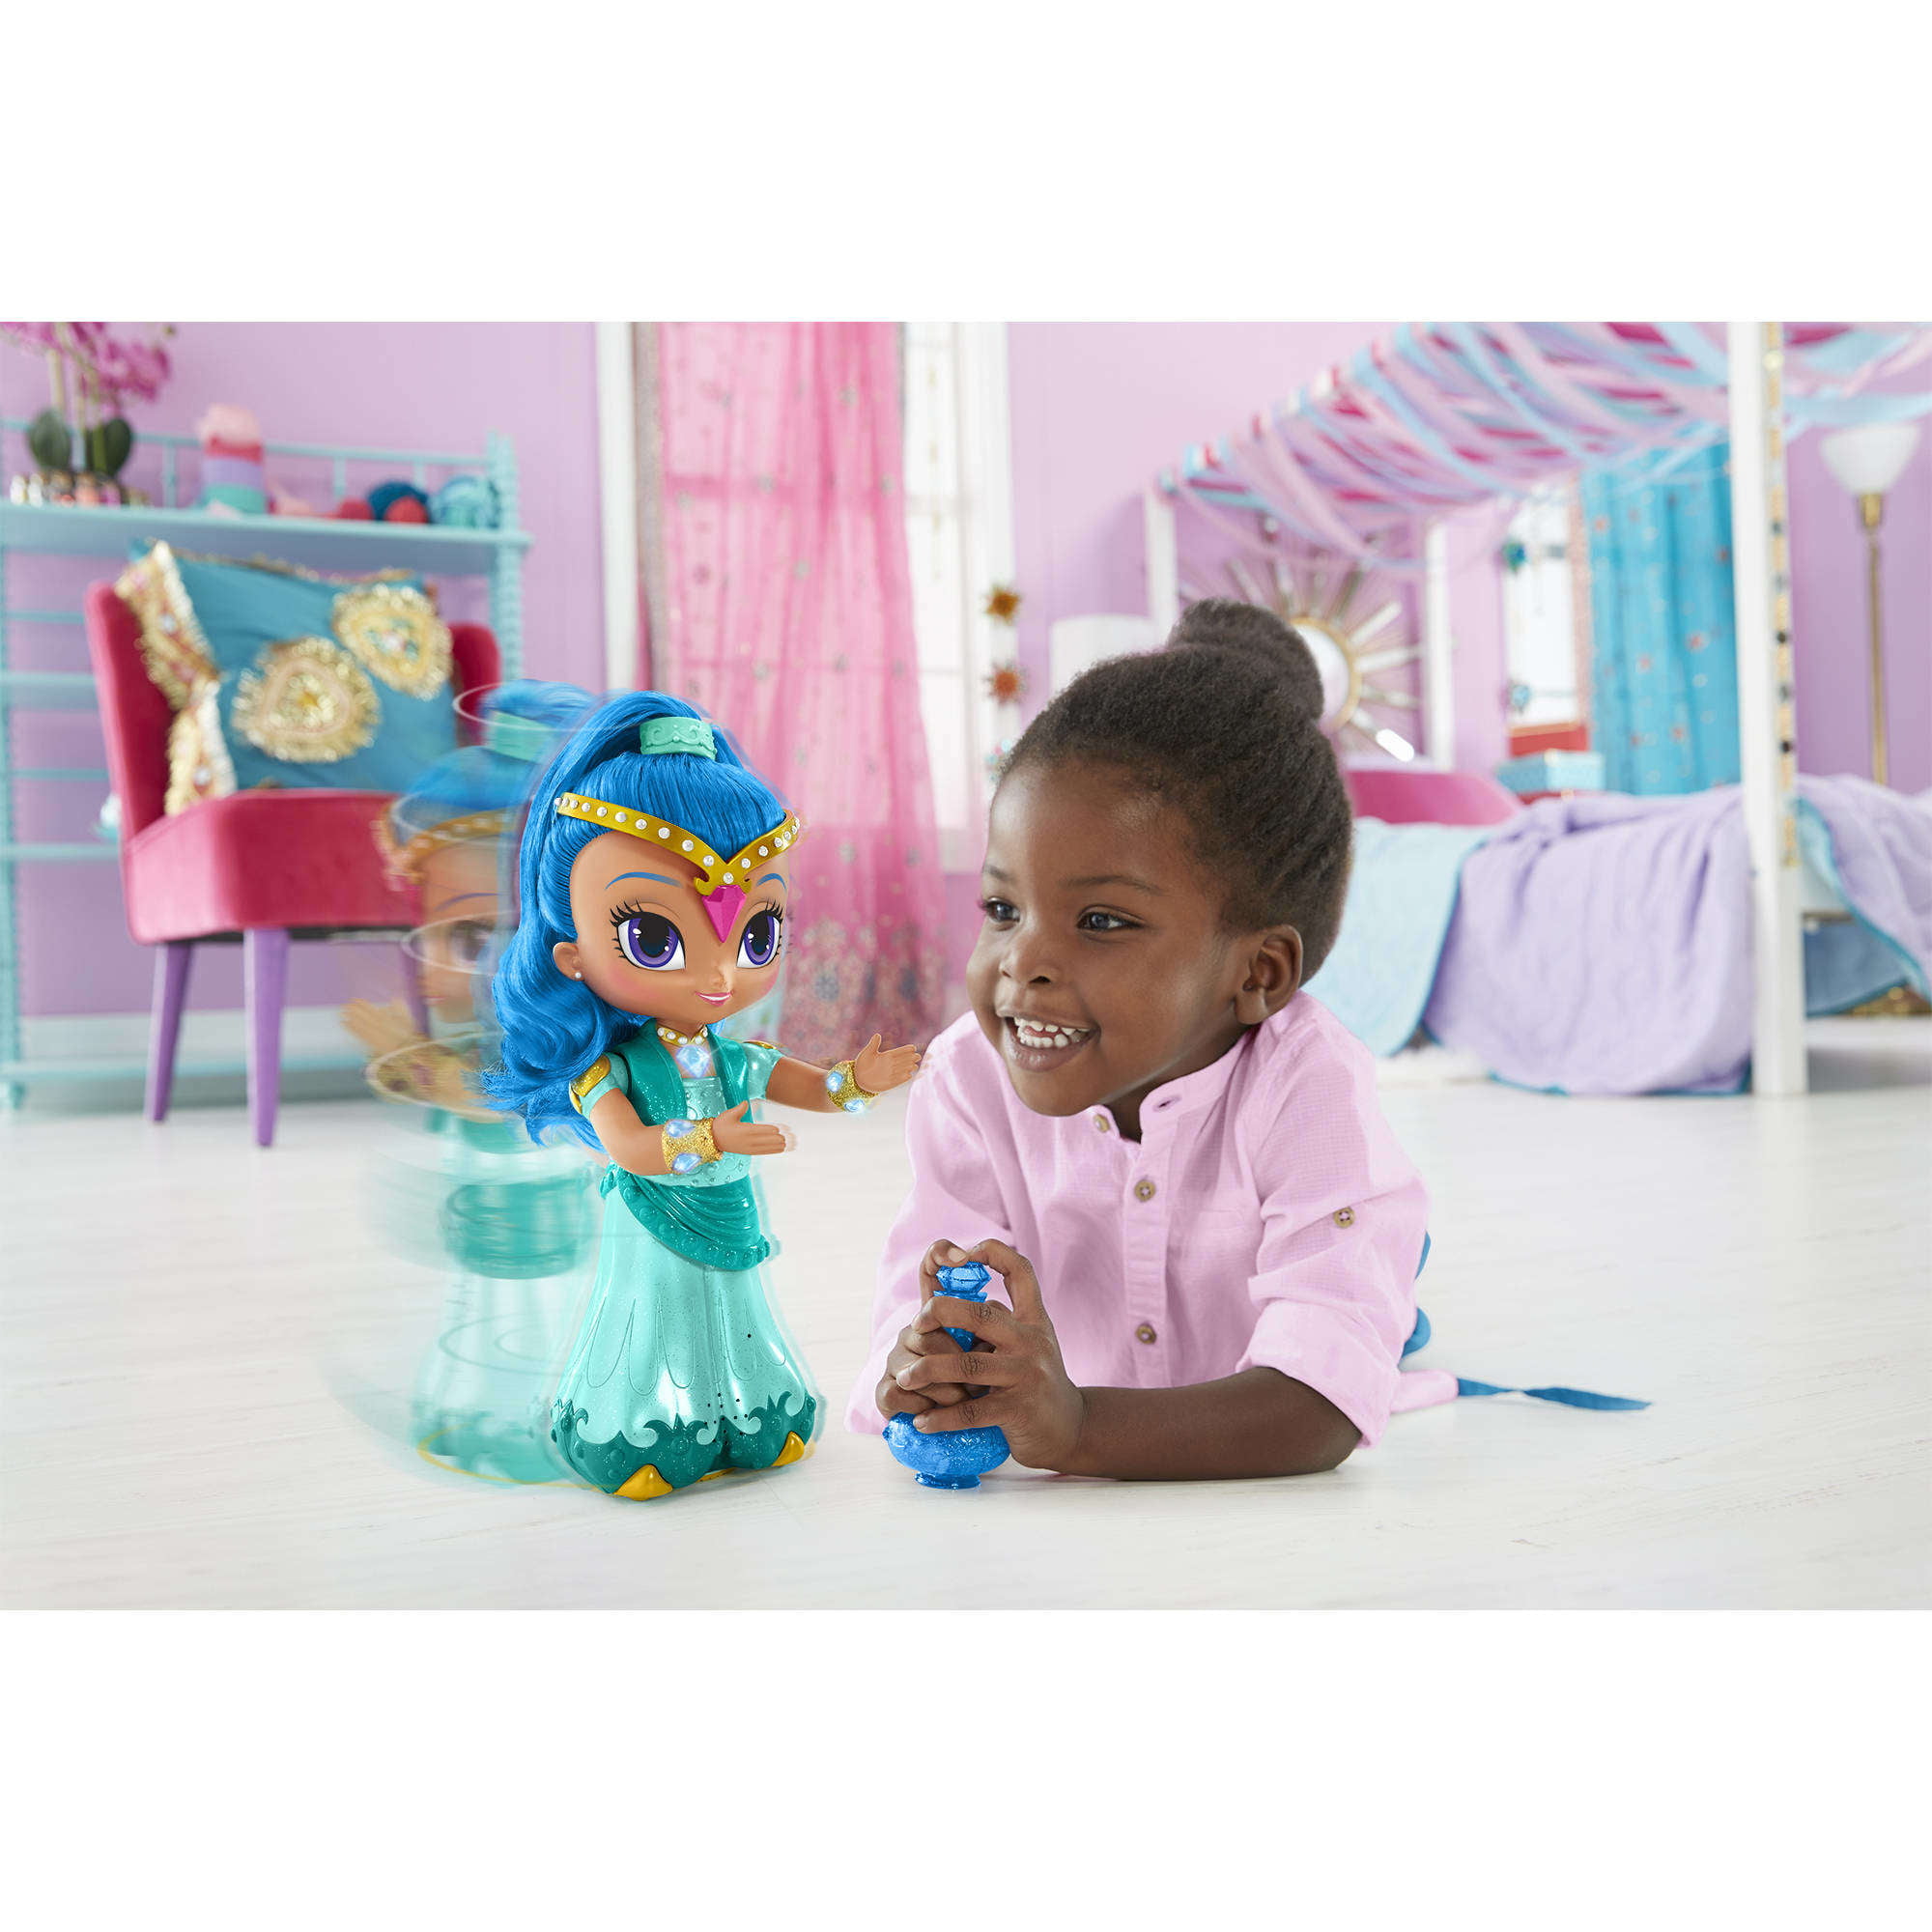 Details about   Fisher Price Shimmer and Shine Wish Spin Doll Ages 3 Toy Play Talk Dance Clap 